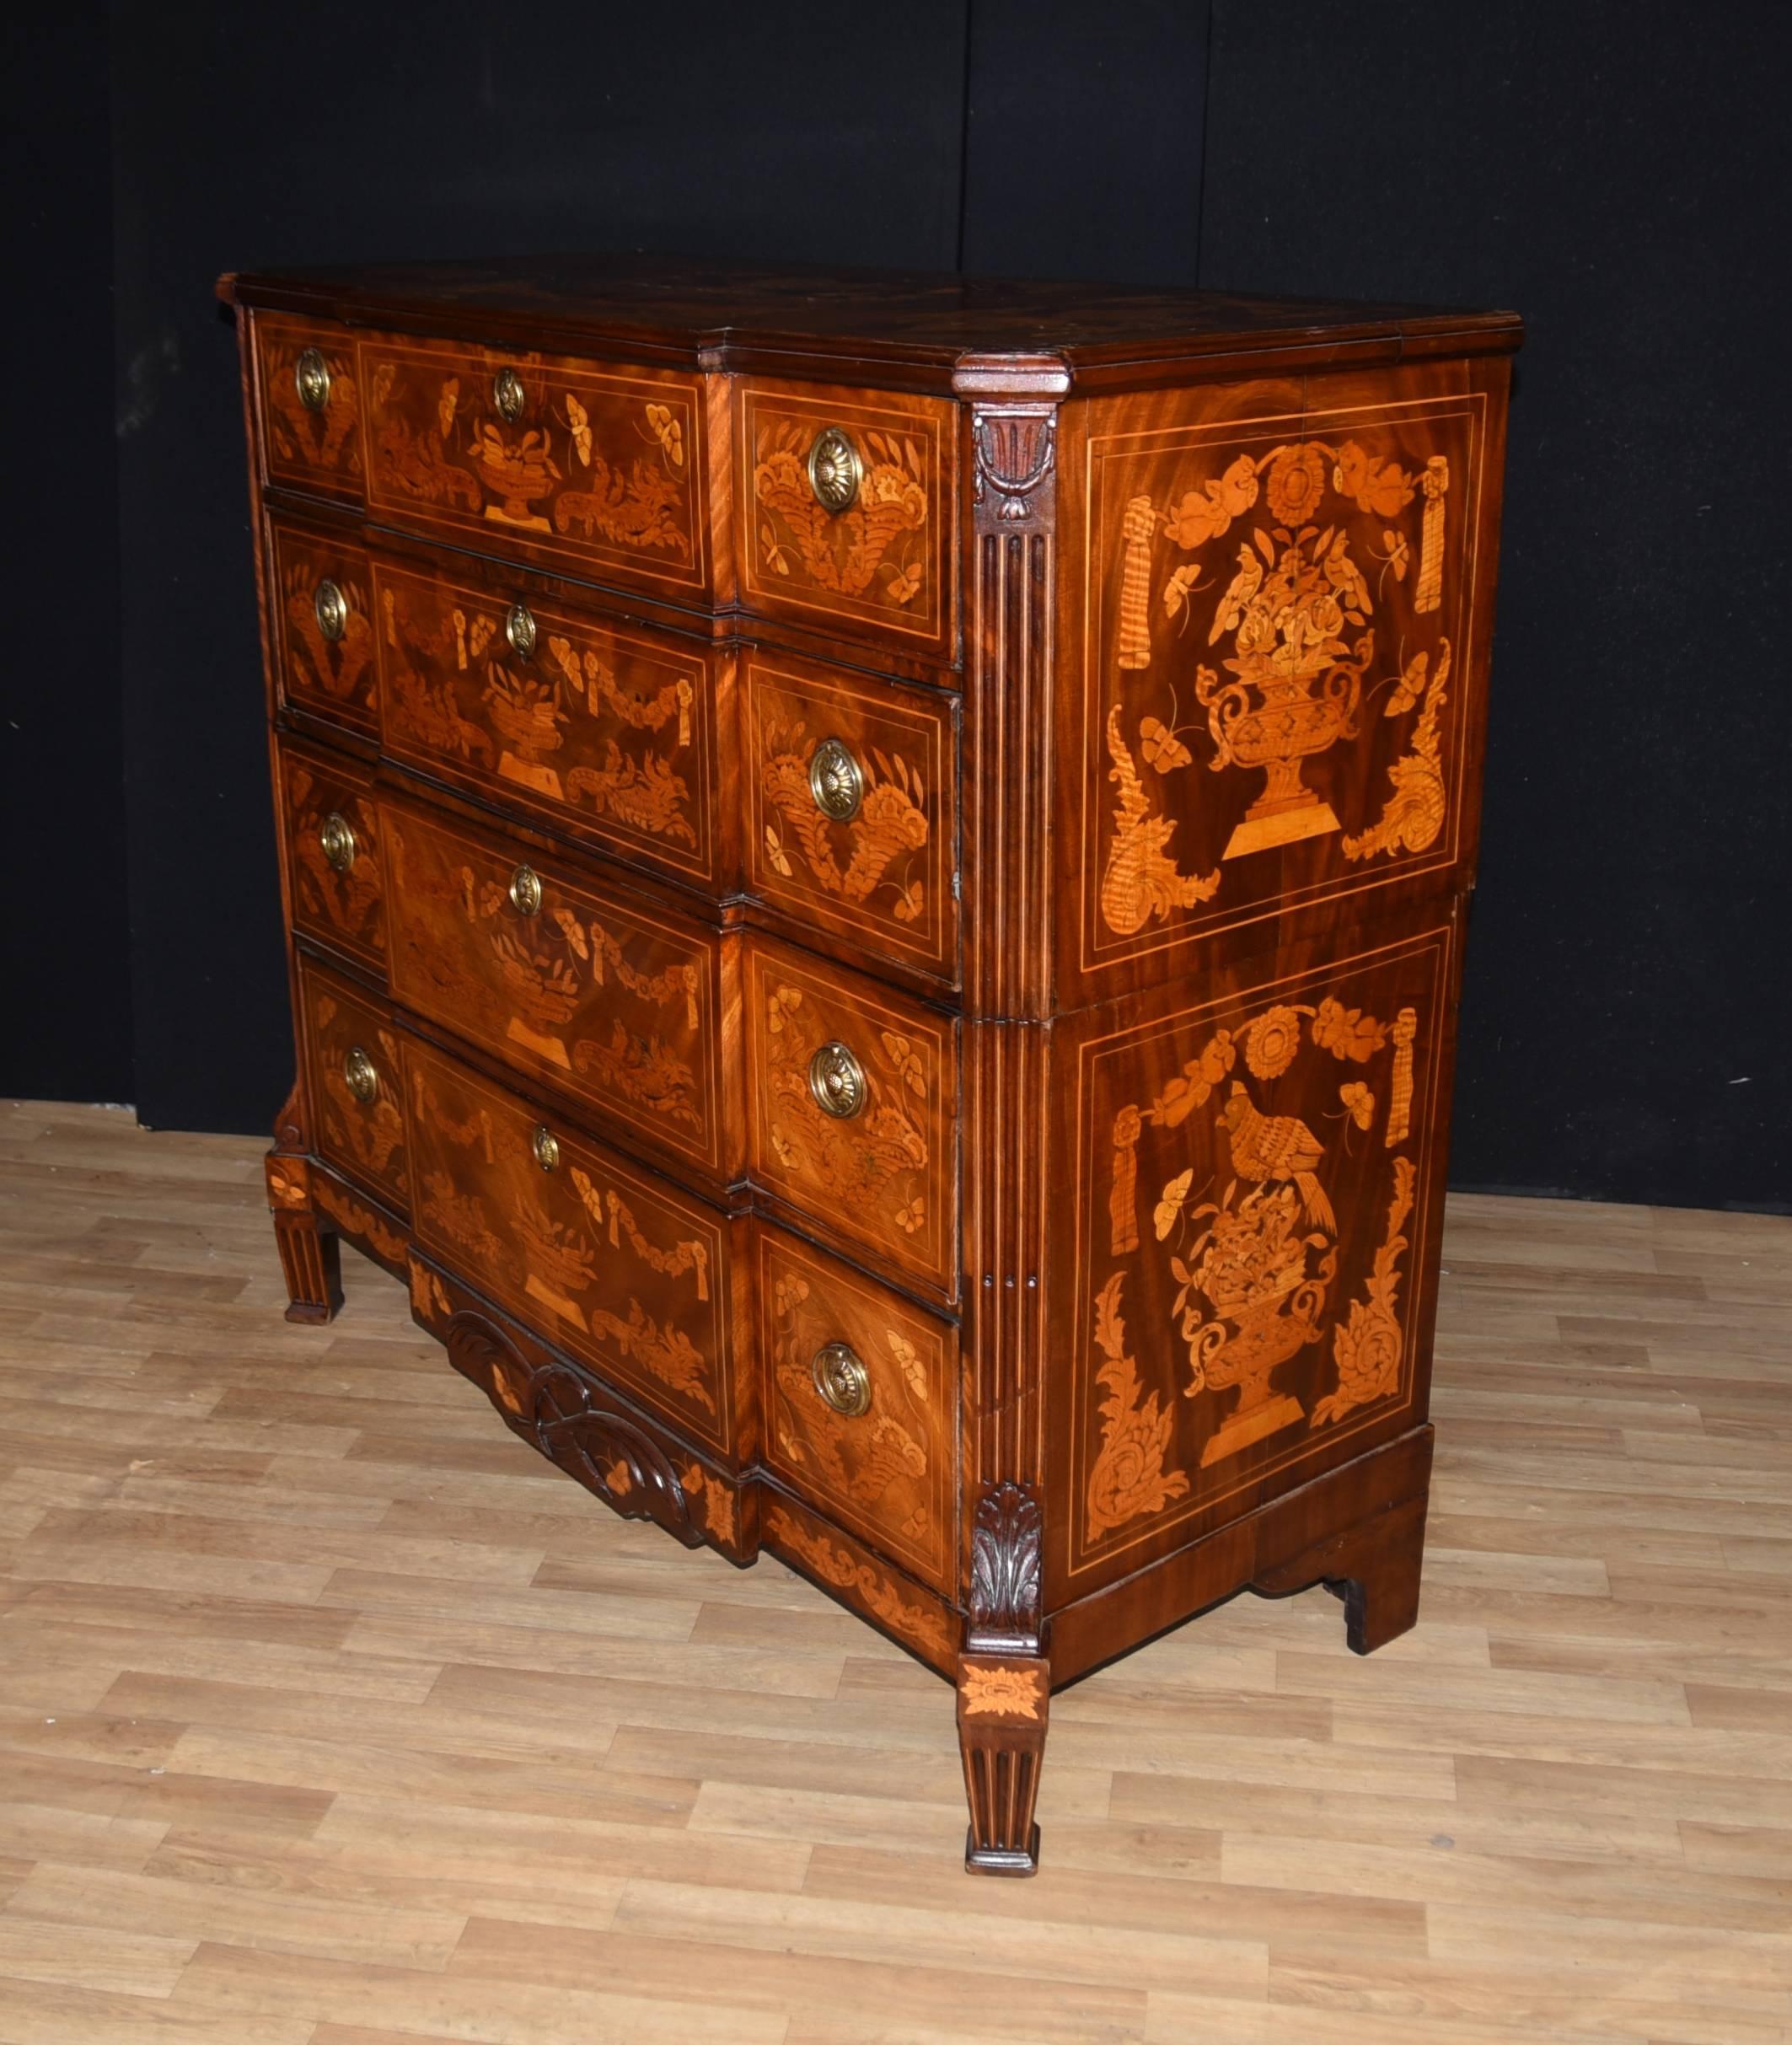 Absolutely exquisite Dutch marquetry antique chest of drawers or commode
Handsome piece, proffusion of intricate marquetry inlay work a delight
Very intricate floral motifs and arabesques
Love the breakfront form to the front
Four drawers so